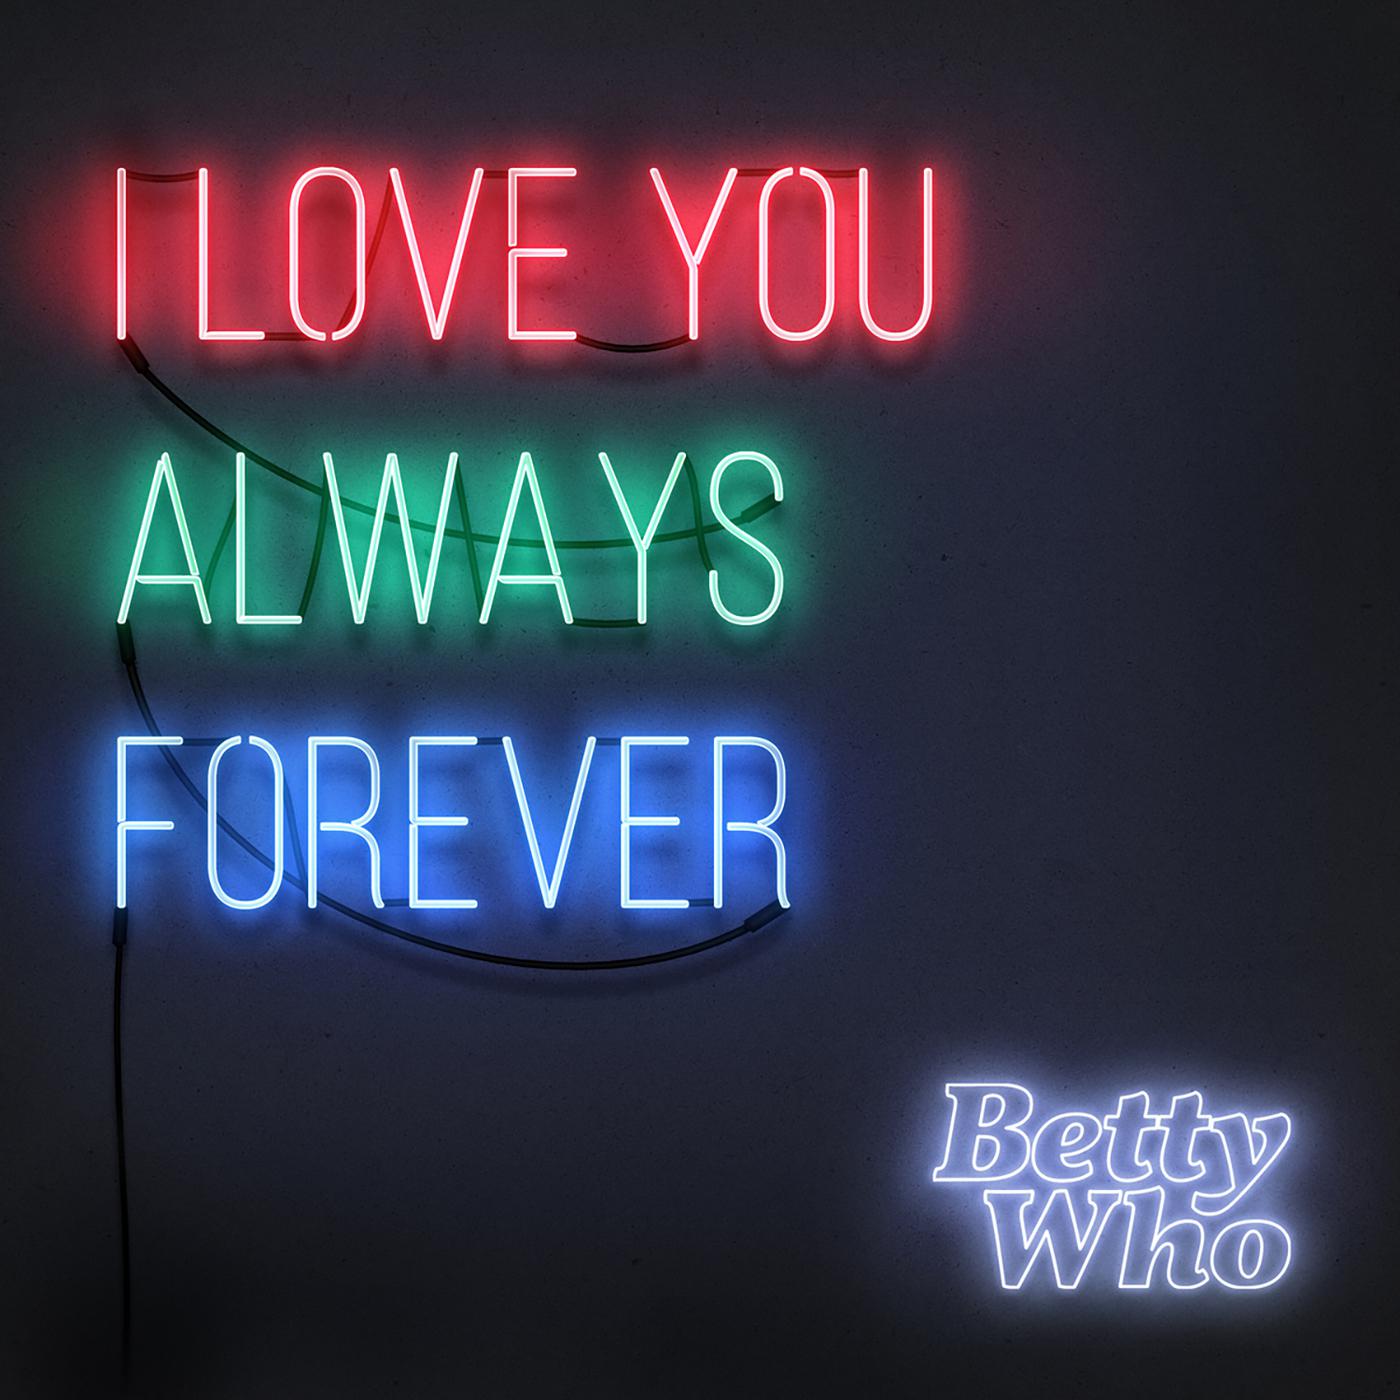 I Love You Always Forever歌词 歌手Betty Who-专辑I Love You Always Forever-单曲《I Love You Always Forever》LRC歌词下载